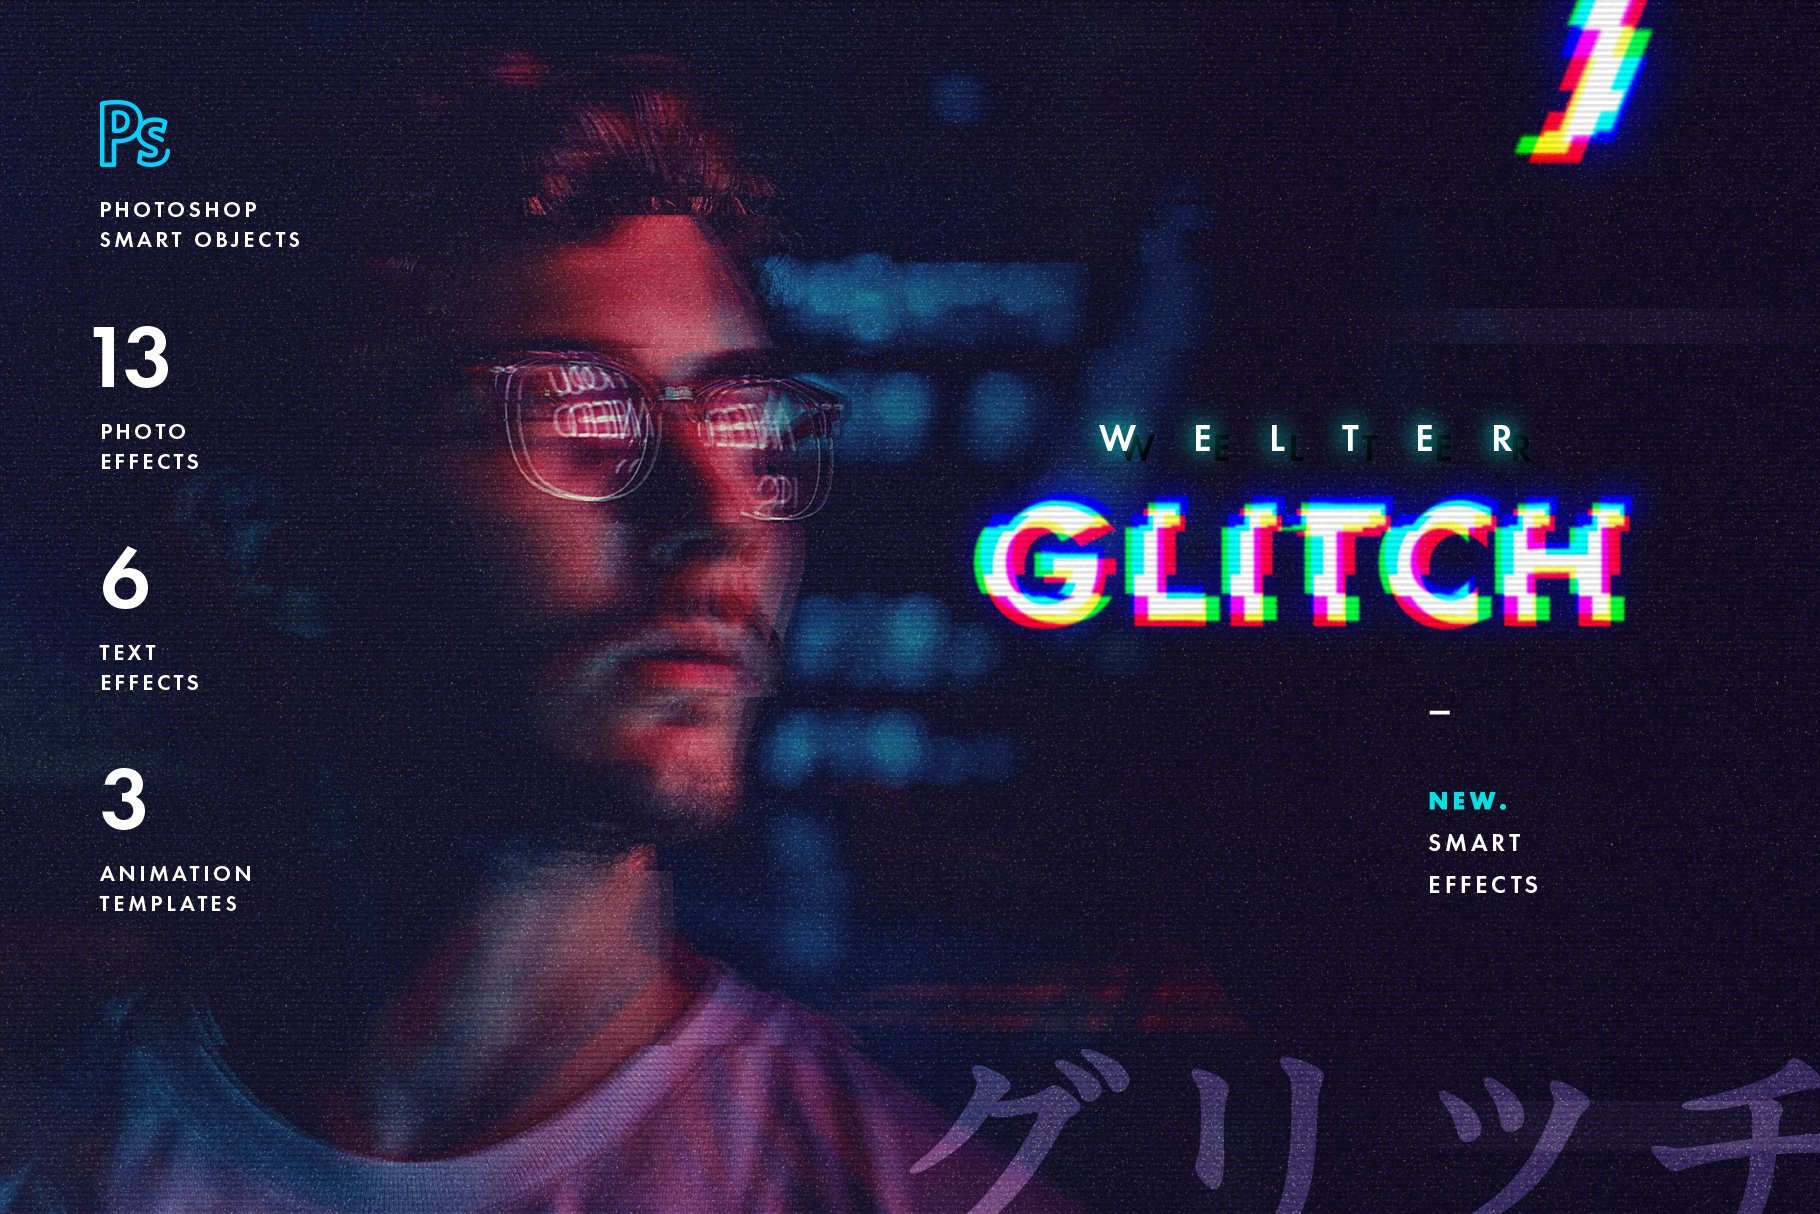 Welter Glitch Effects